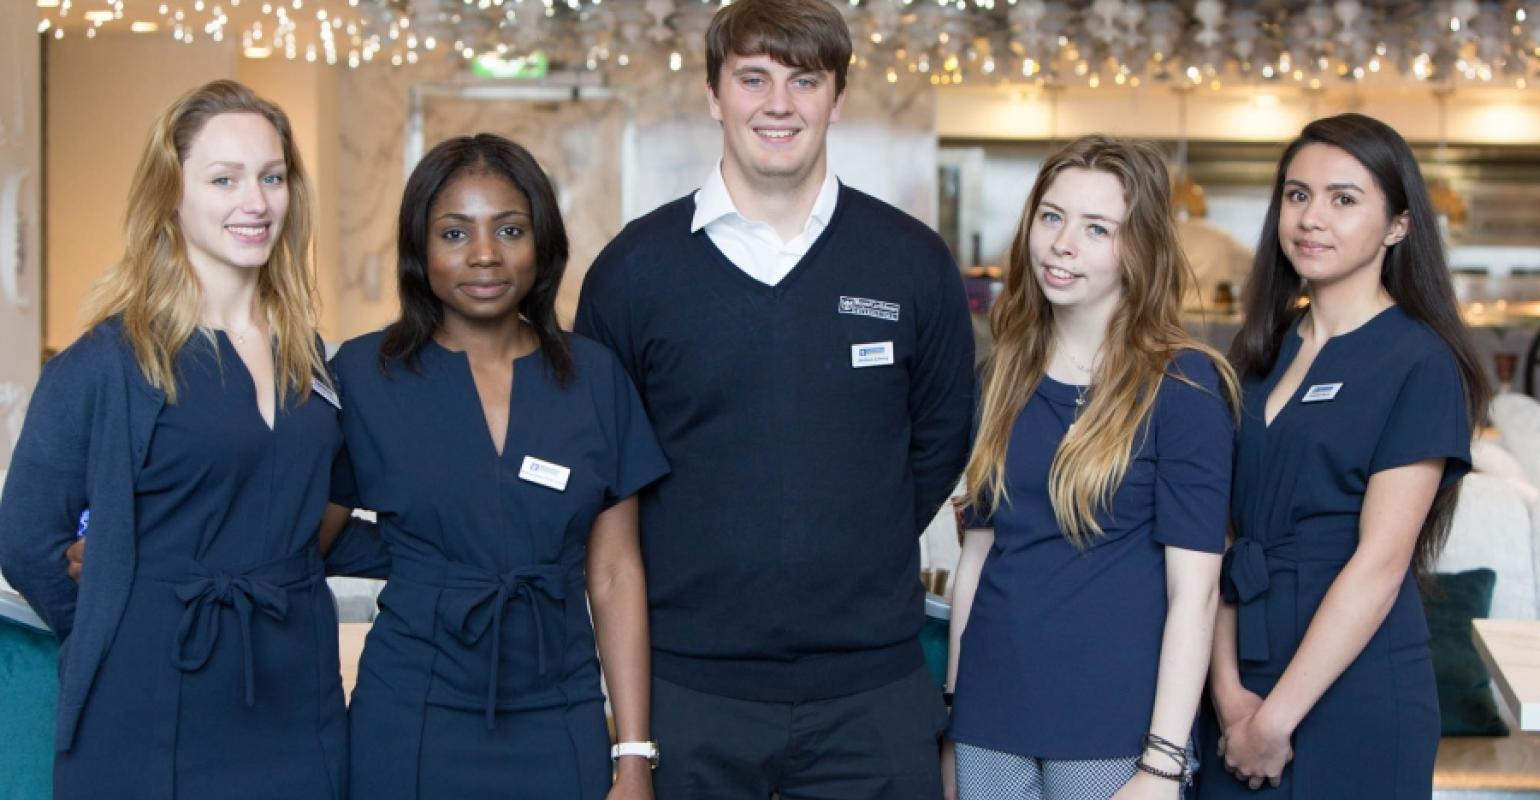 Royal Caribbean partners with University of Chester for internship